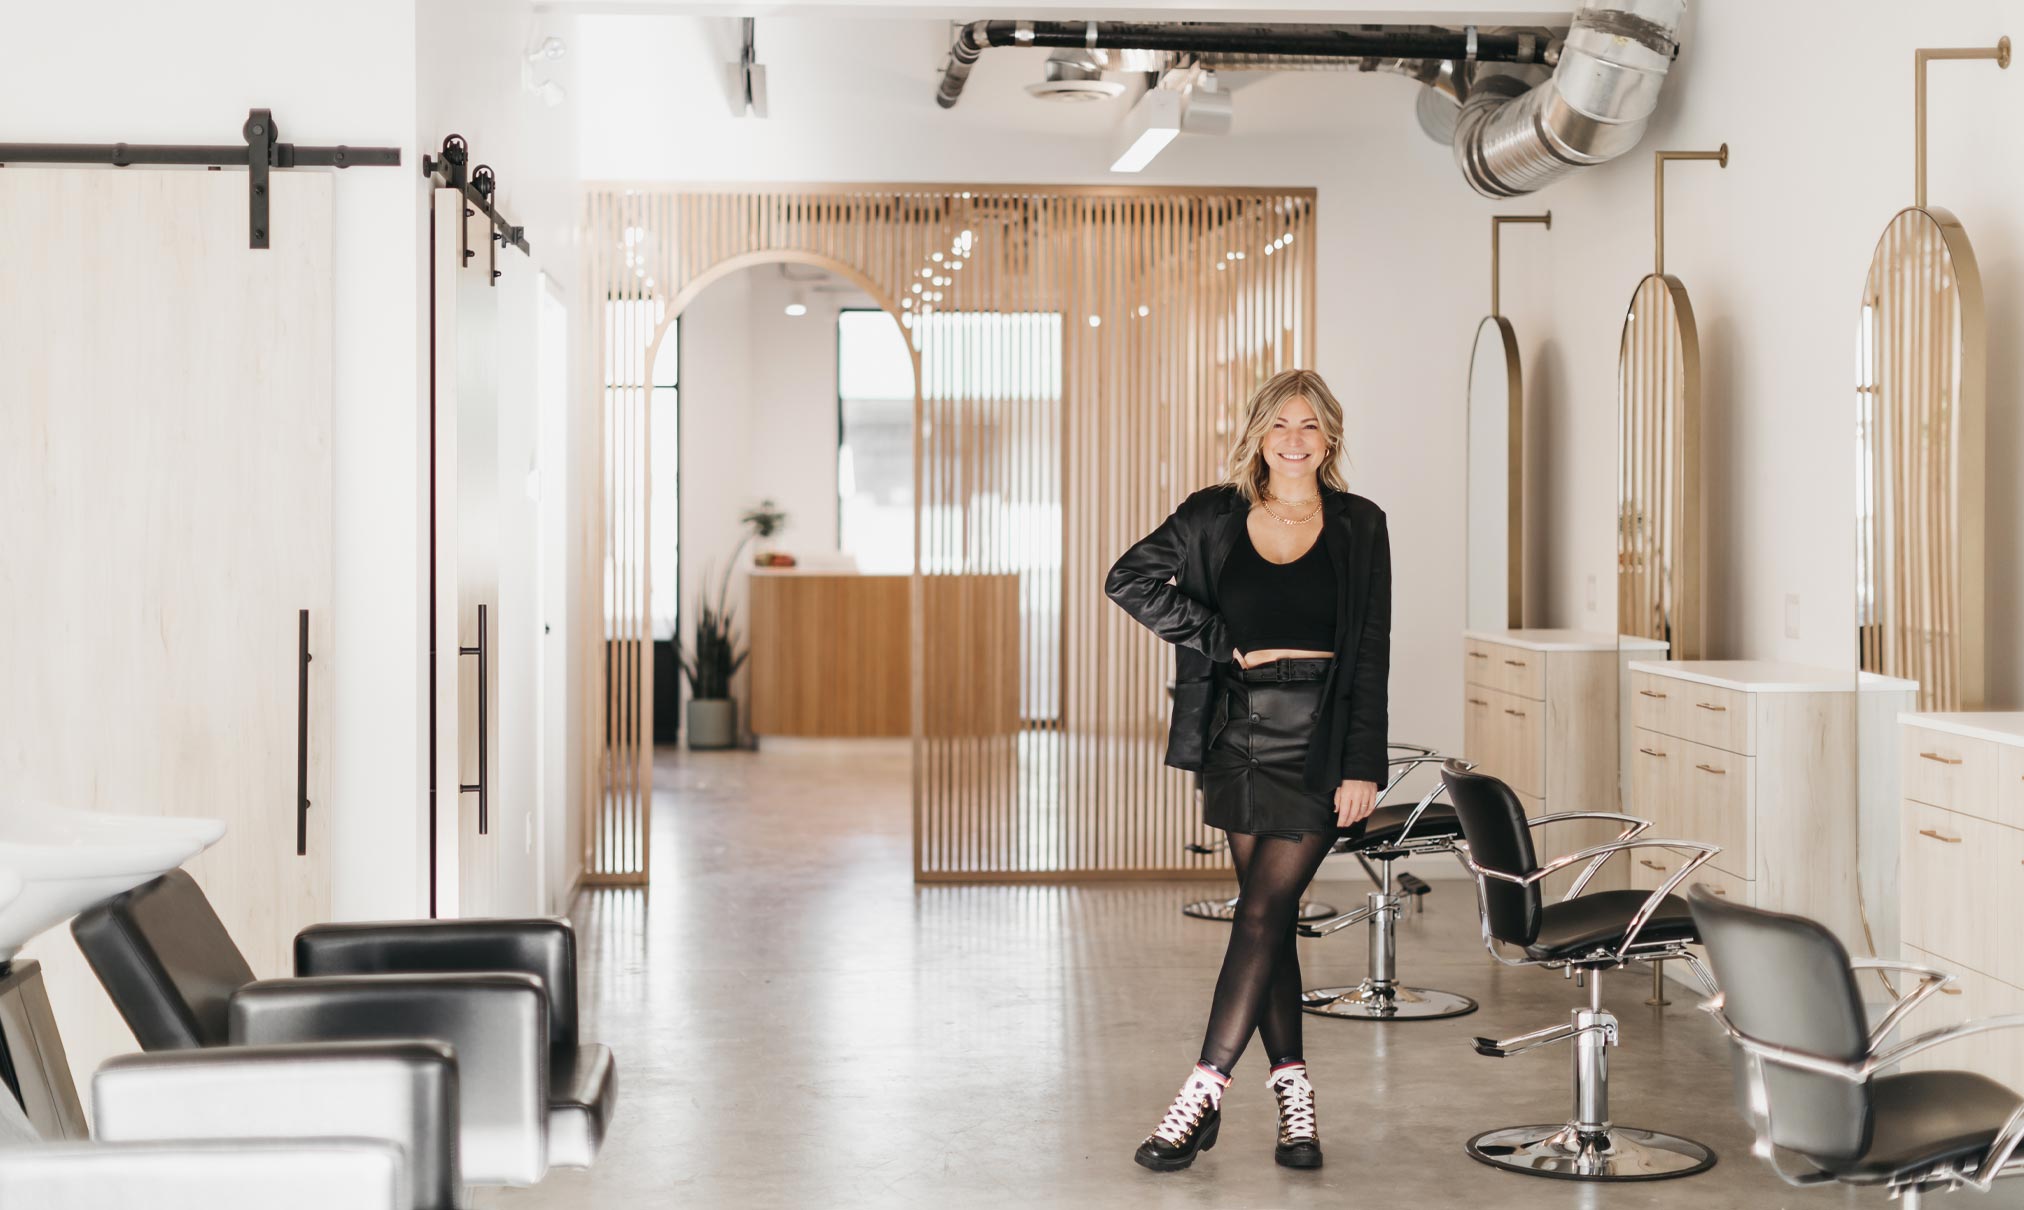 an image of Nicole and the salon